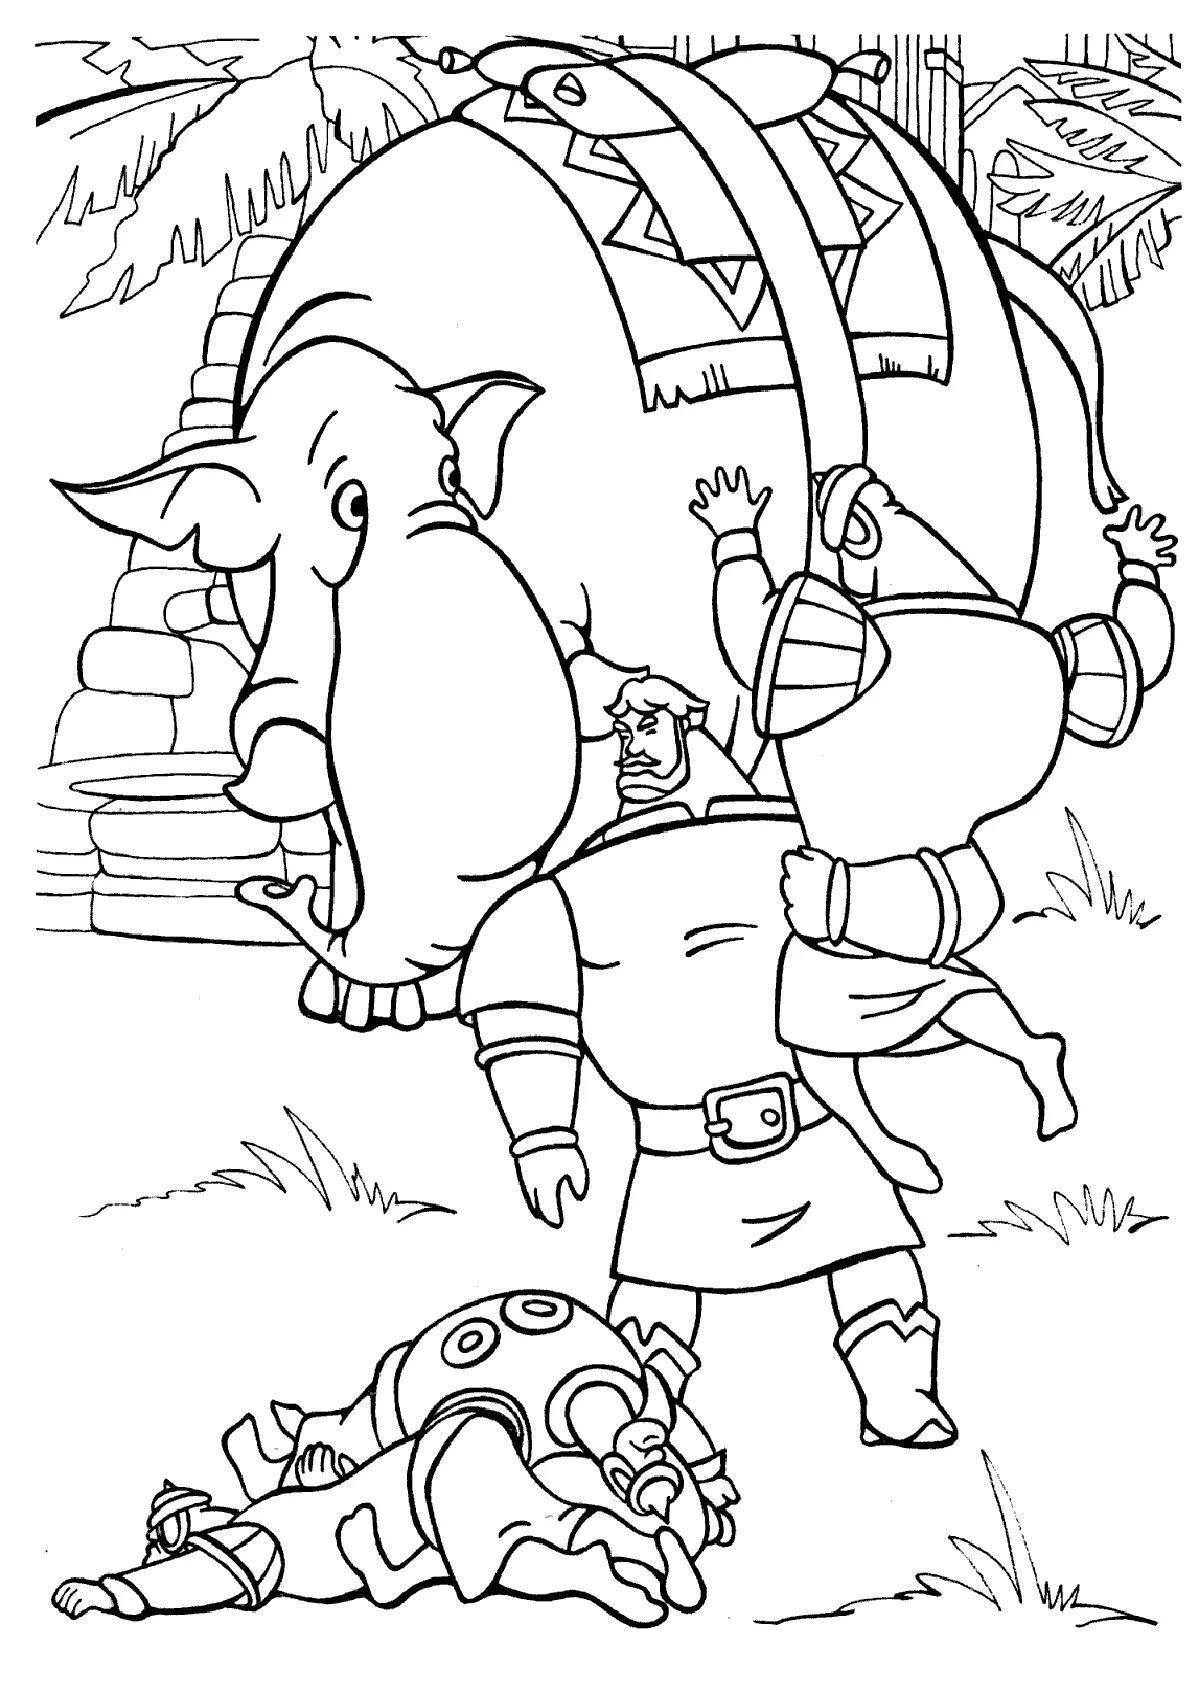 Colorful coloring page 3 heroes of the game